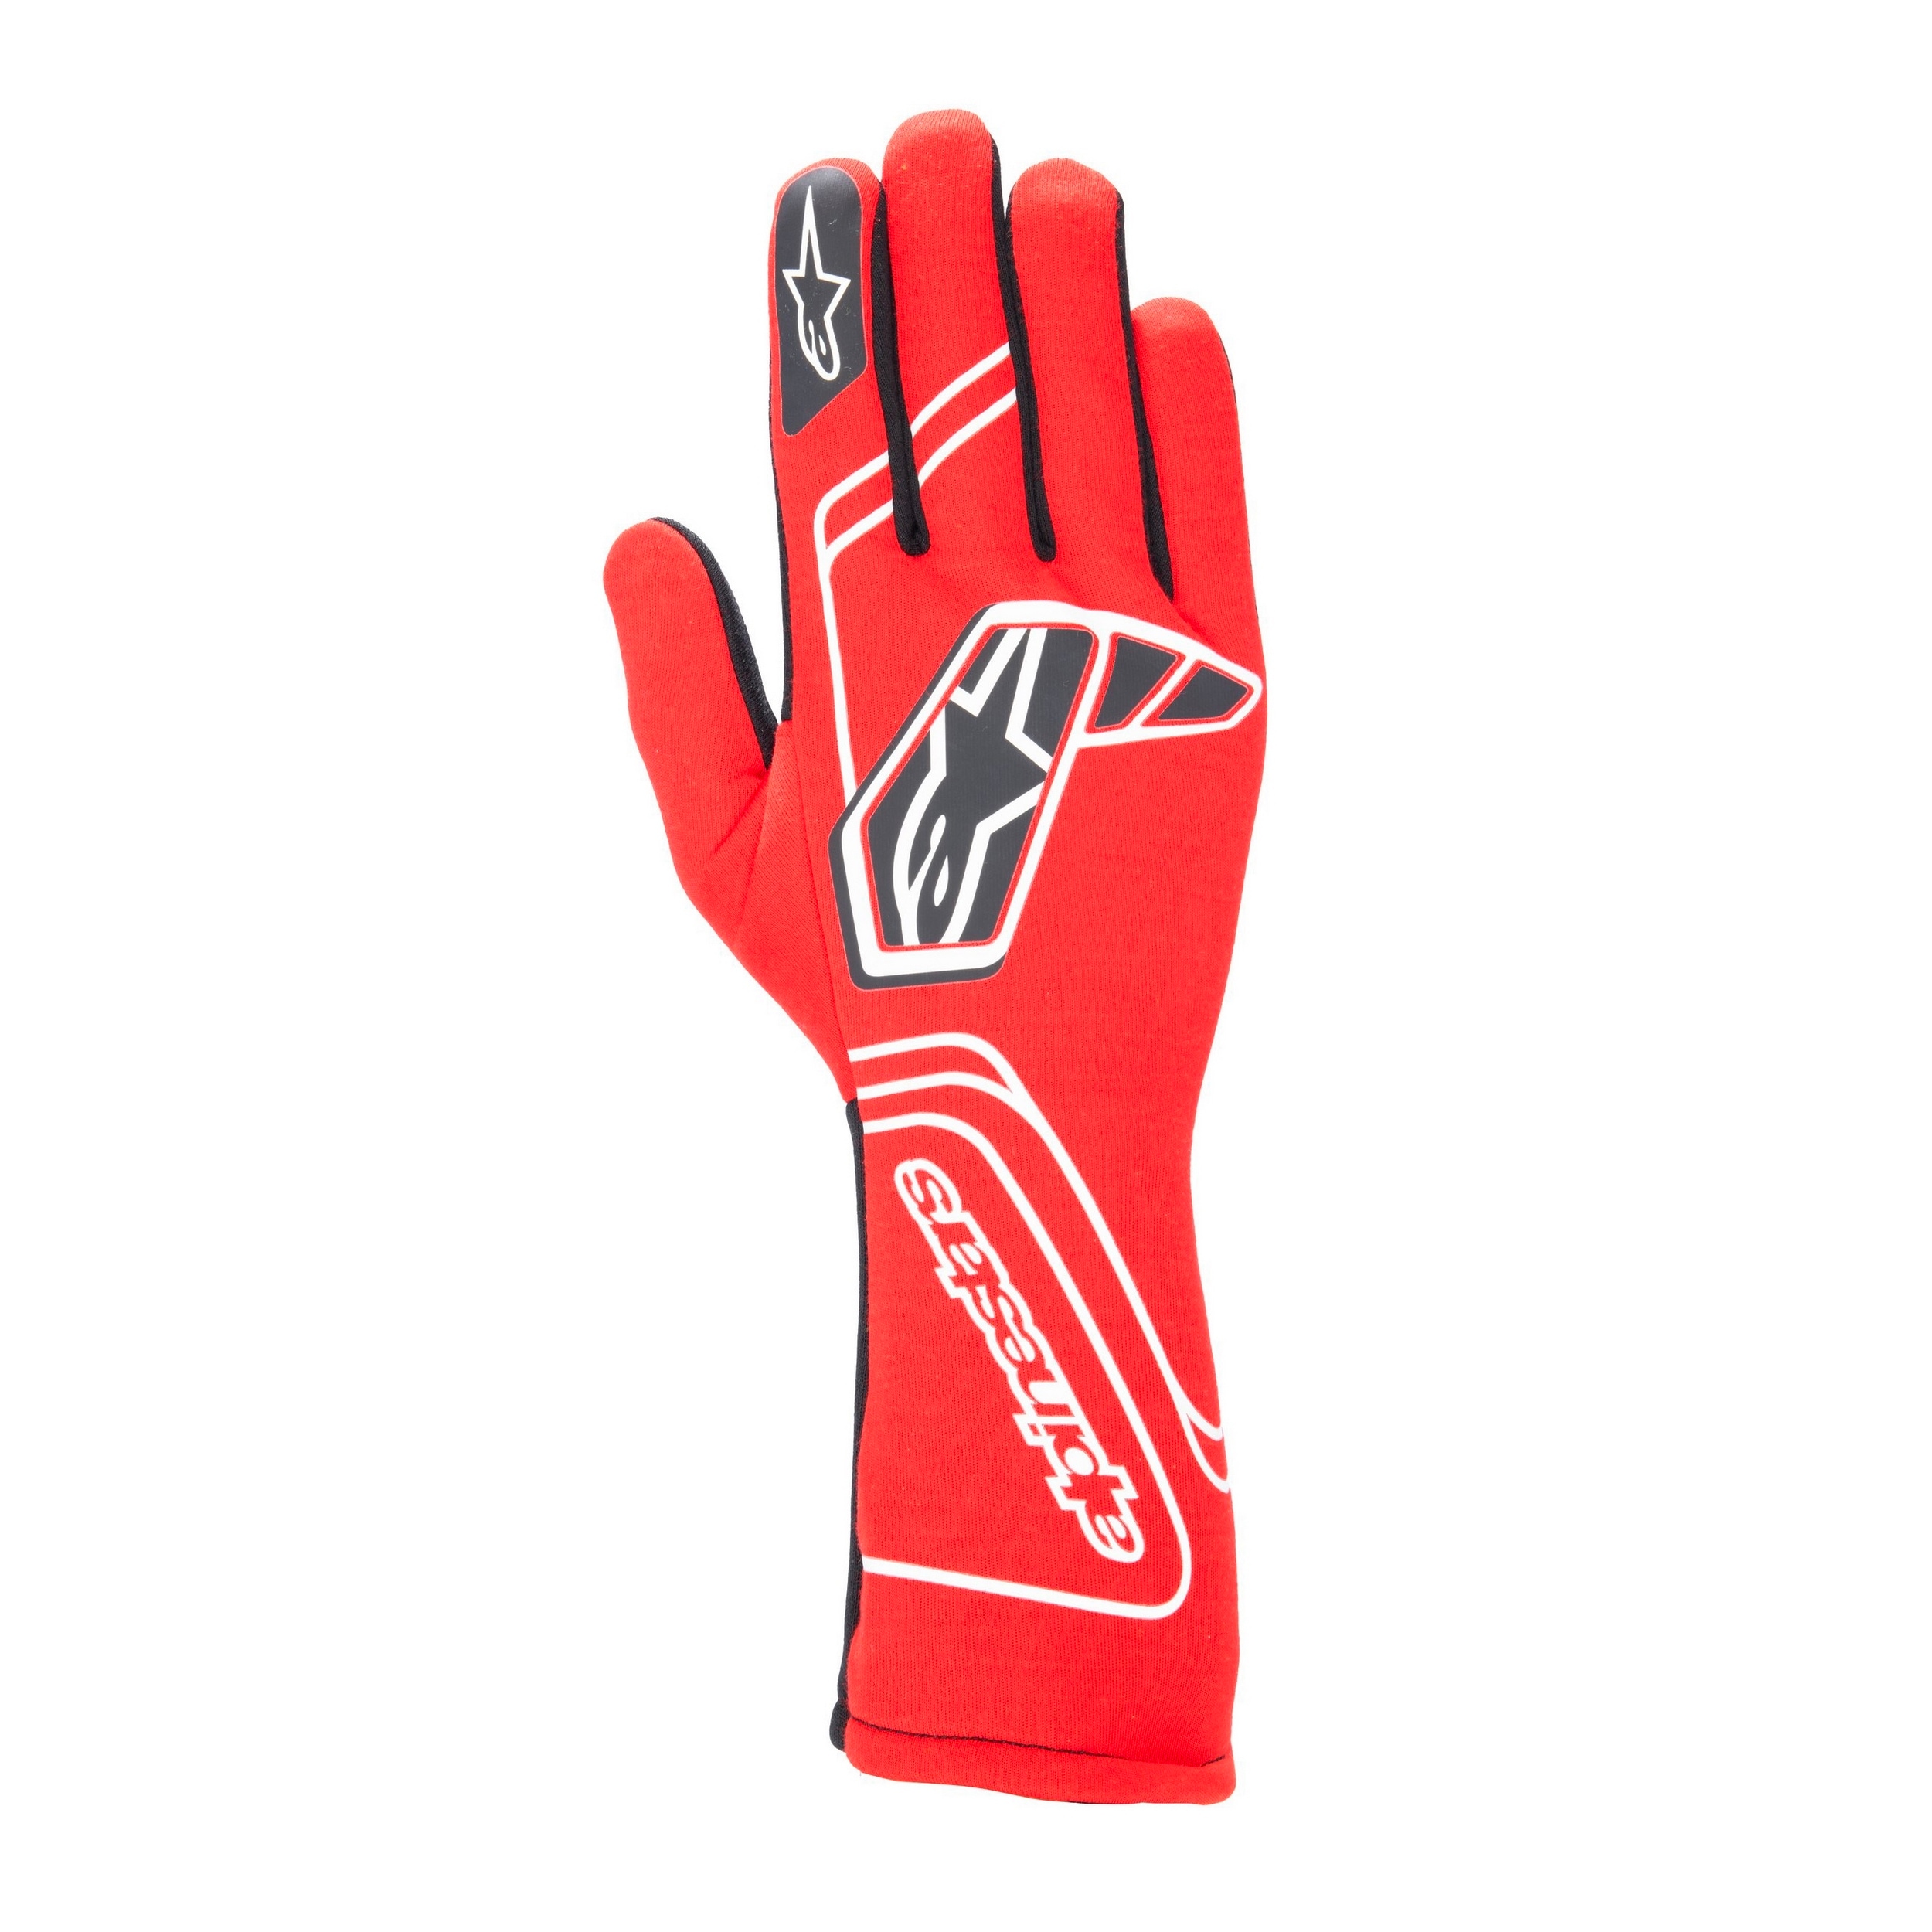 Gants Karting Sparco Arrow K Infinity Noirs & Rouges